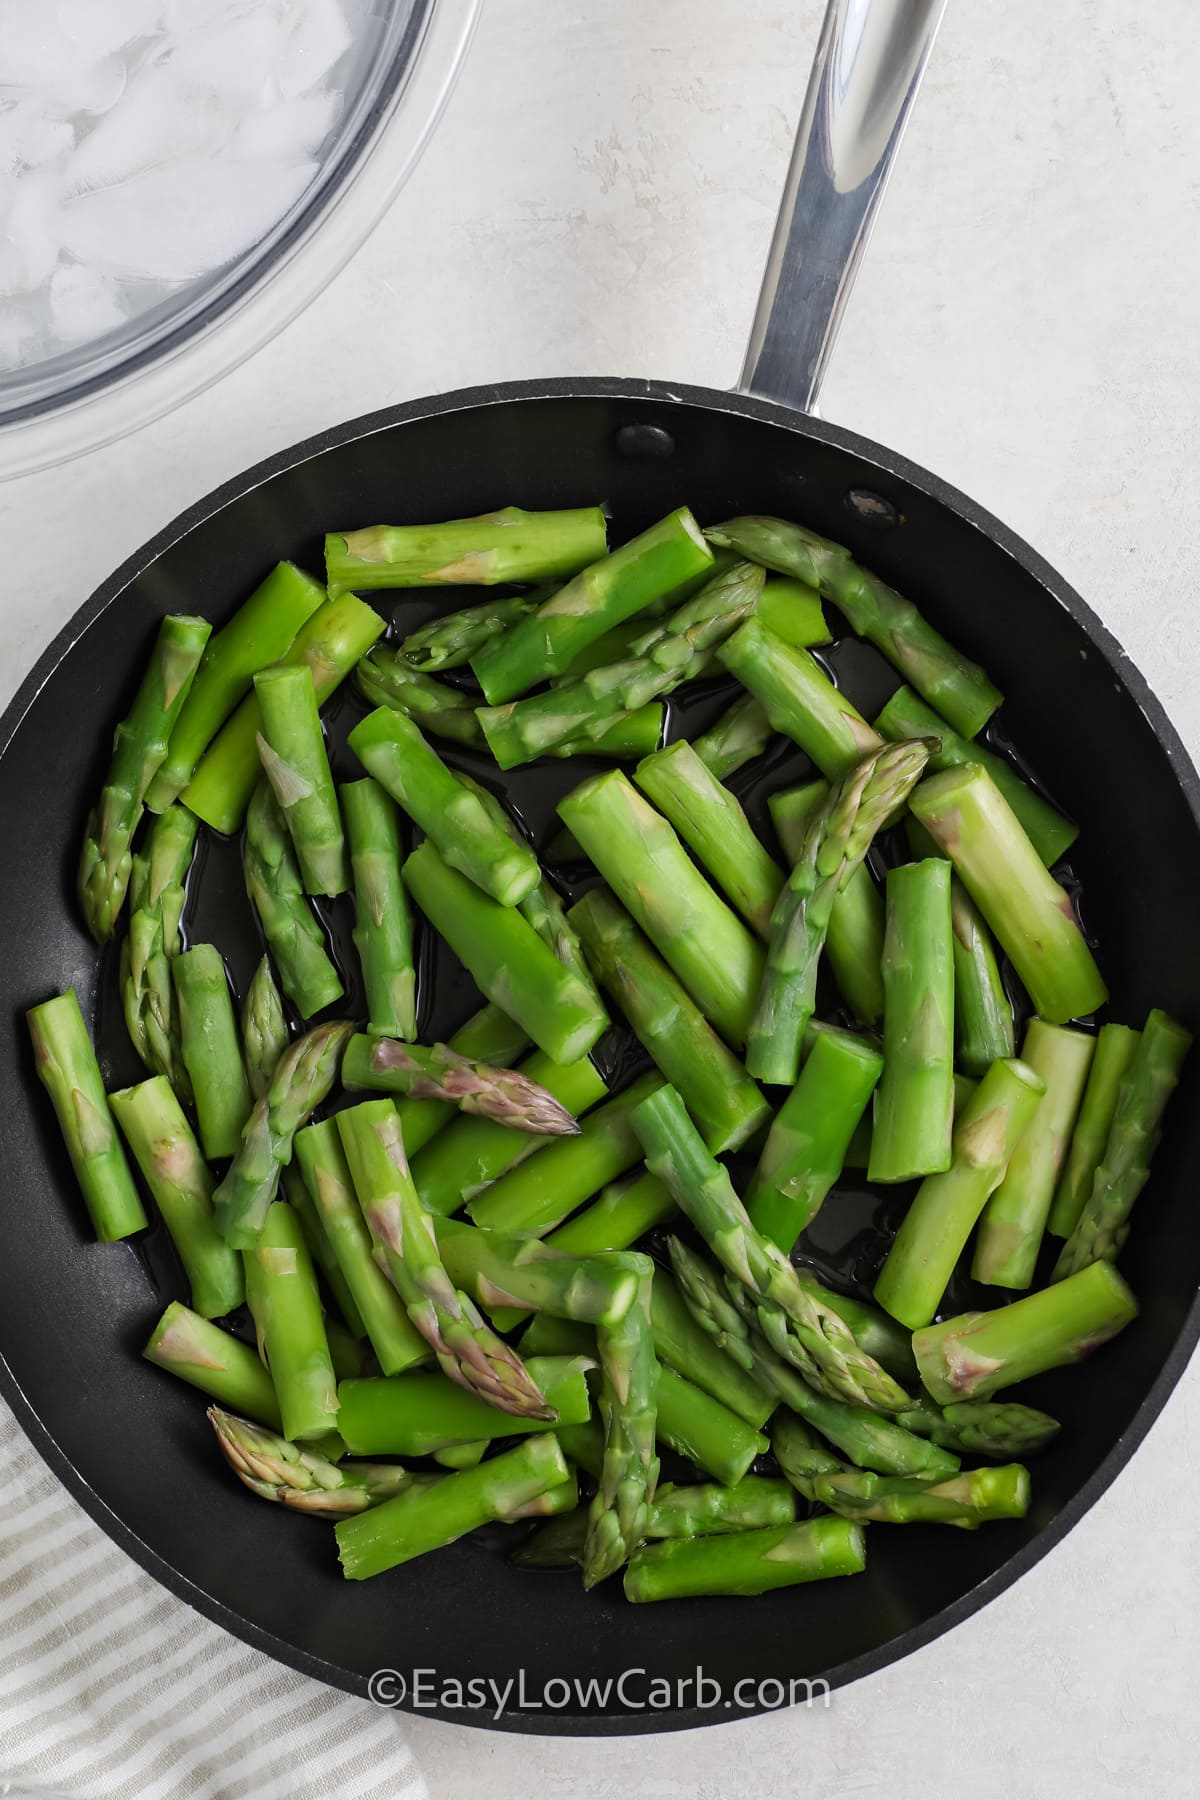 Chopped Asparagus in a frying pan